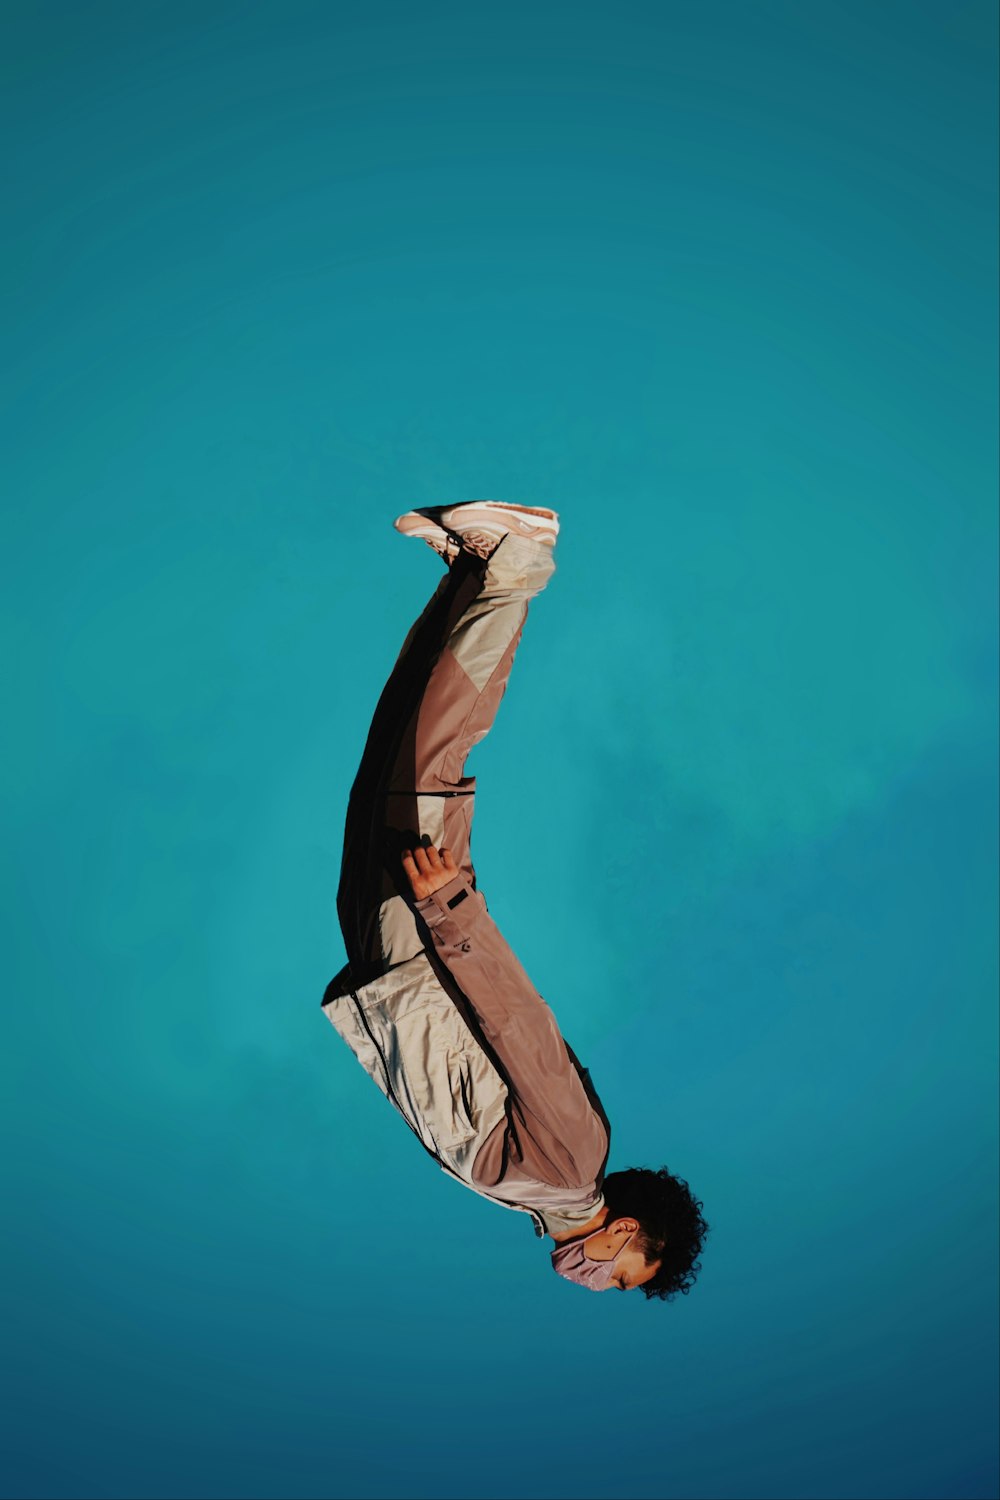 Person Falling Picture. Download Free Image